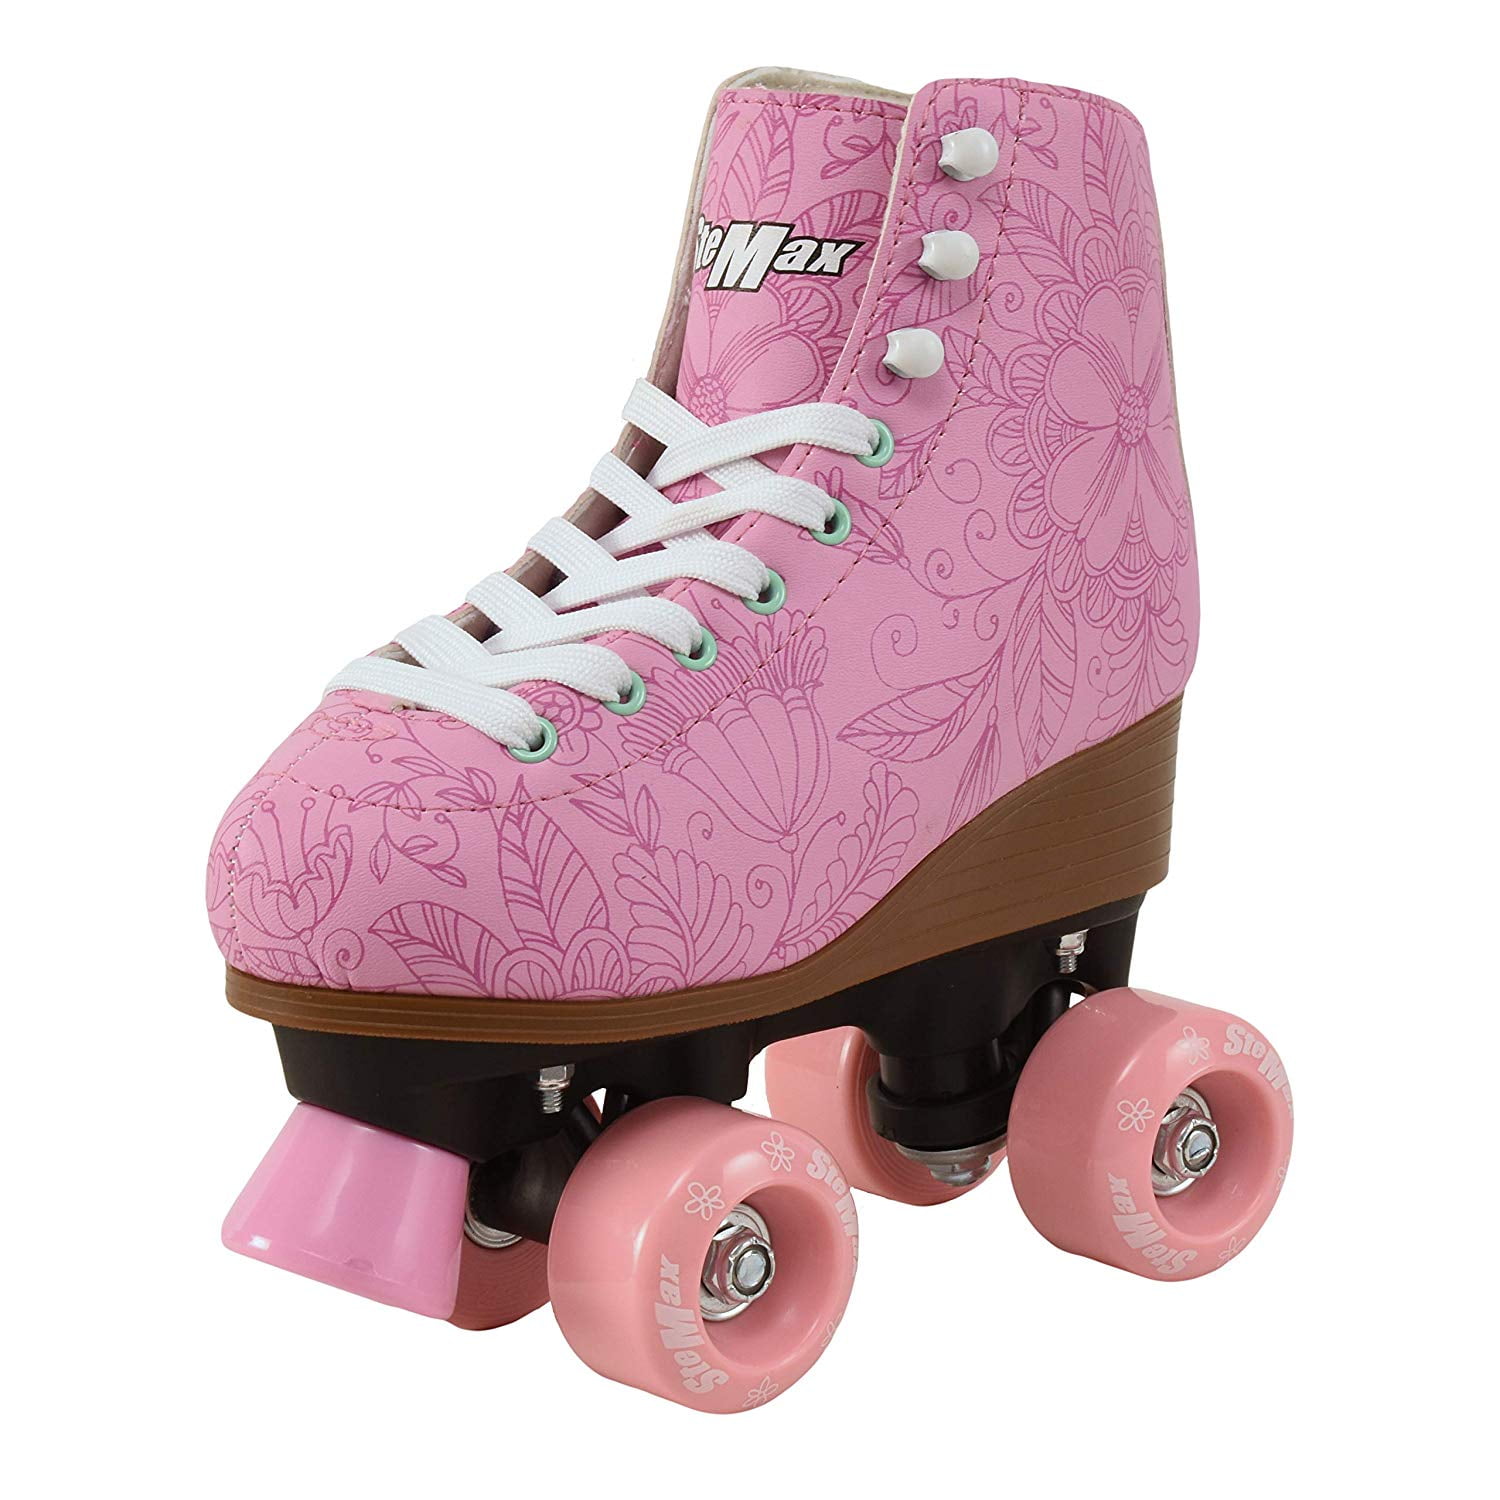 Skate Gear Roller Skates with Retro Quad Design for Kids and Adults Pink 